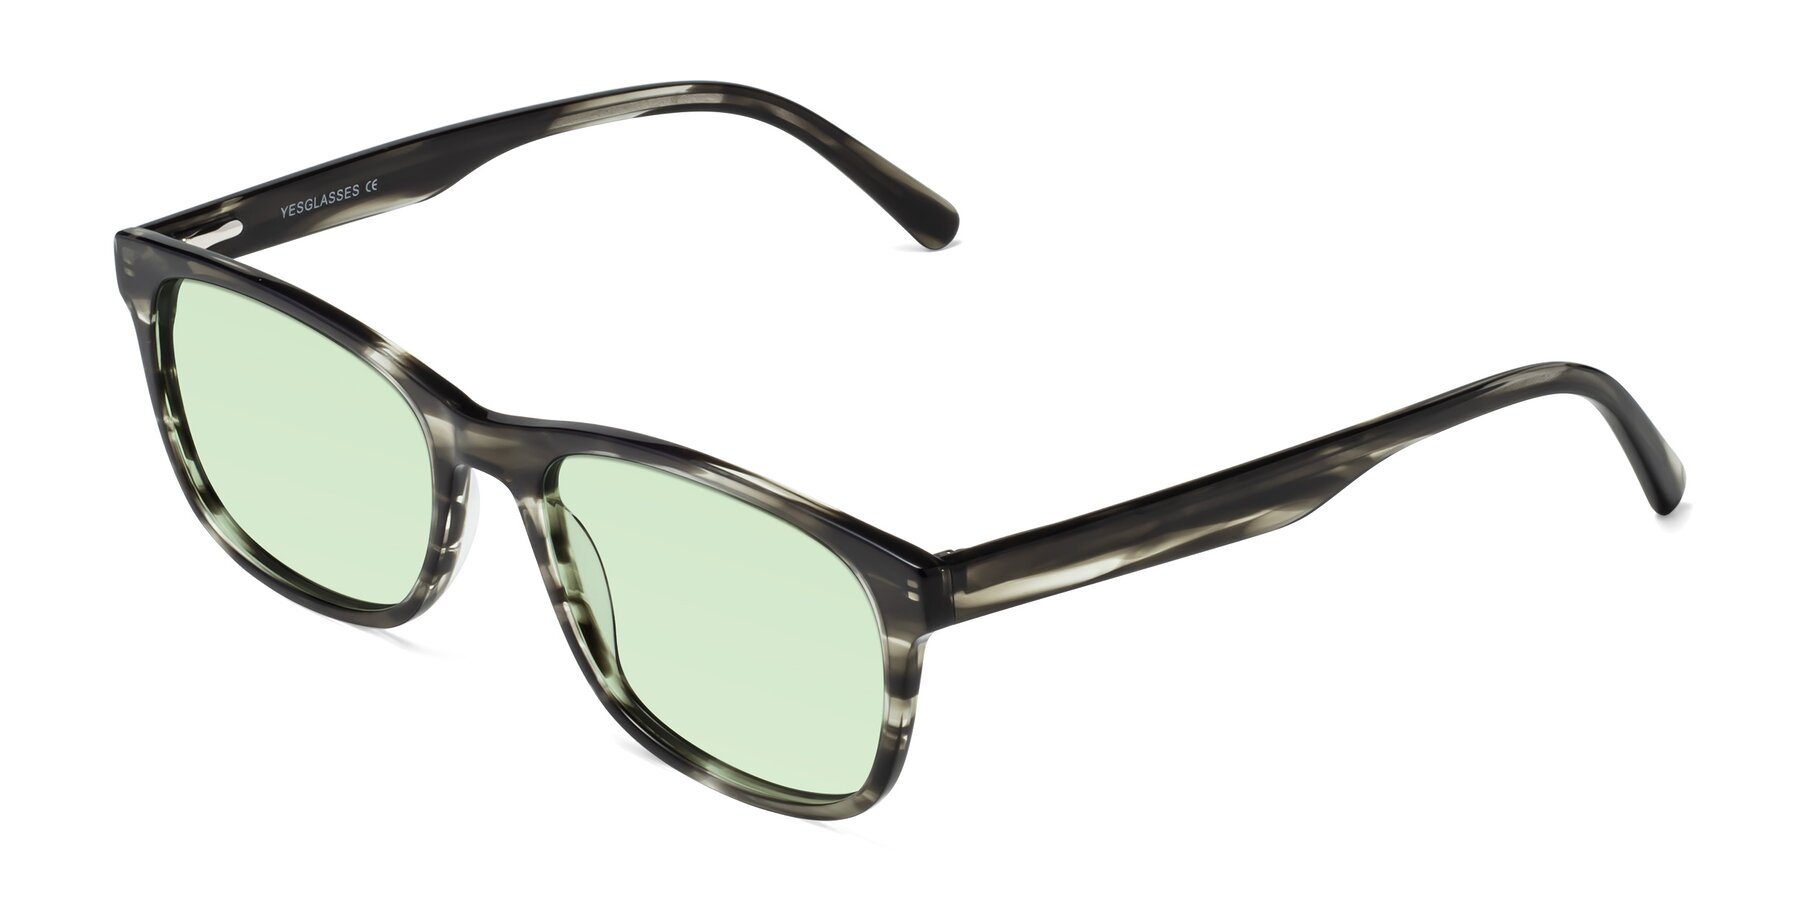 Angle of Navarro in Gray-Tortoise with Light Green Tinted Lenses